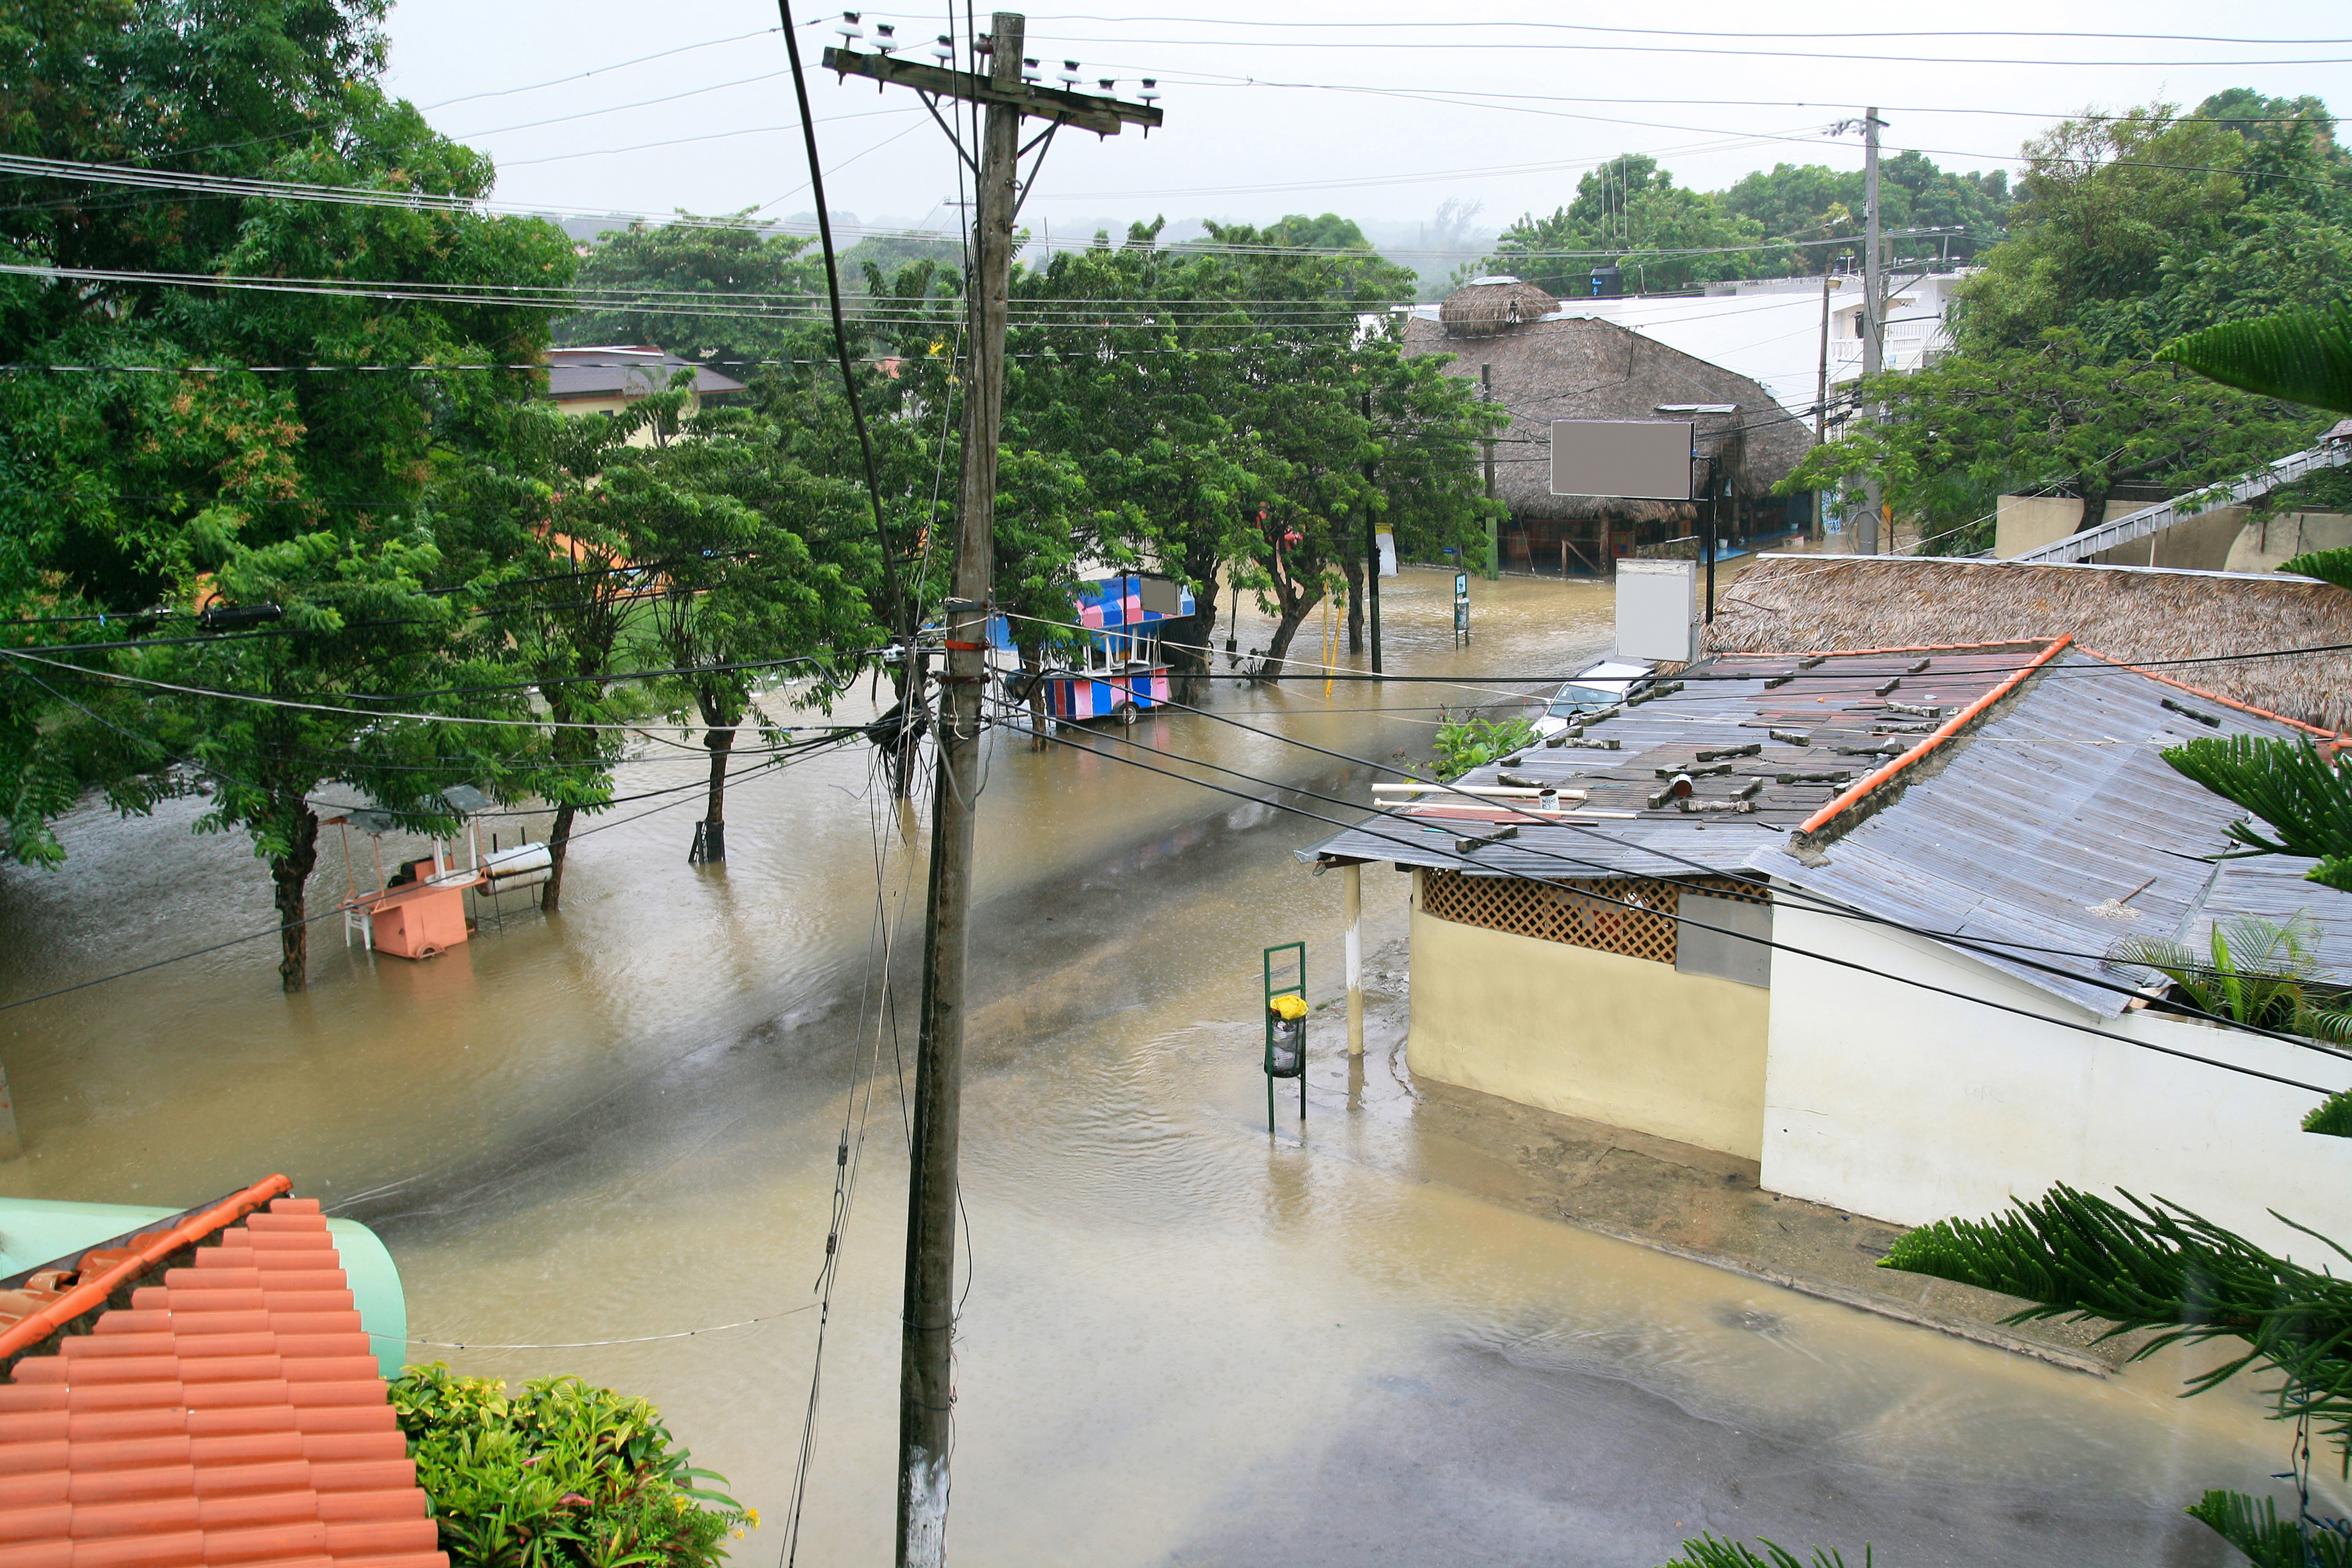 Flooded street with damaged utility poles and buildings filled with water